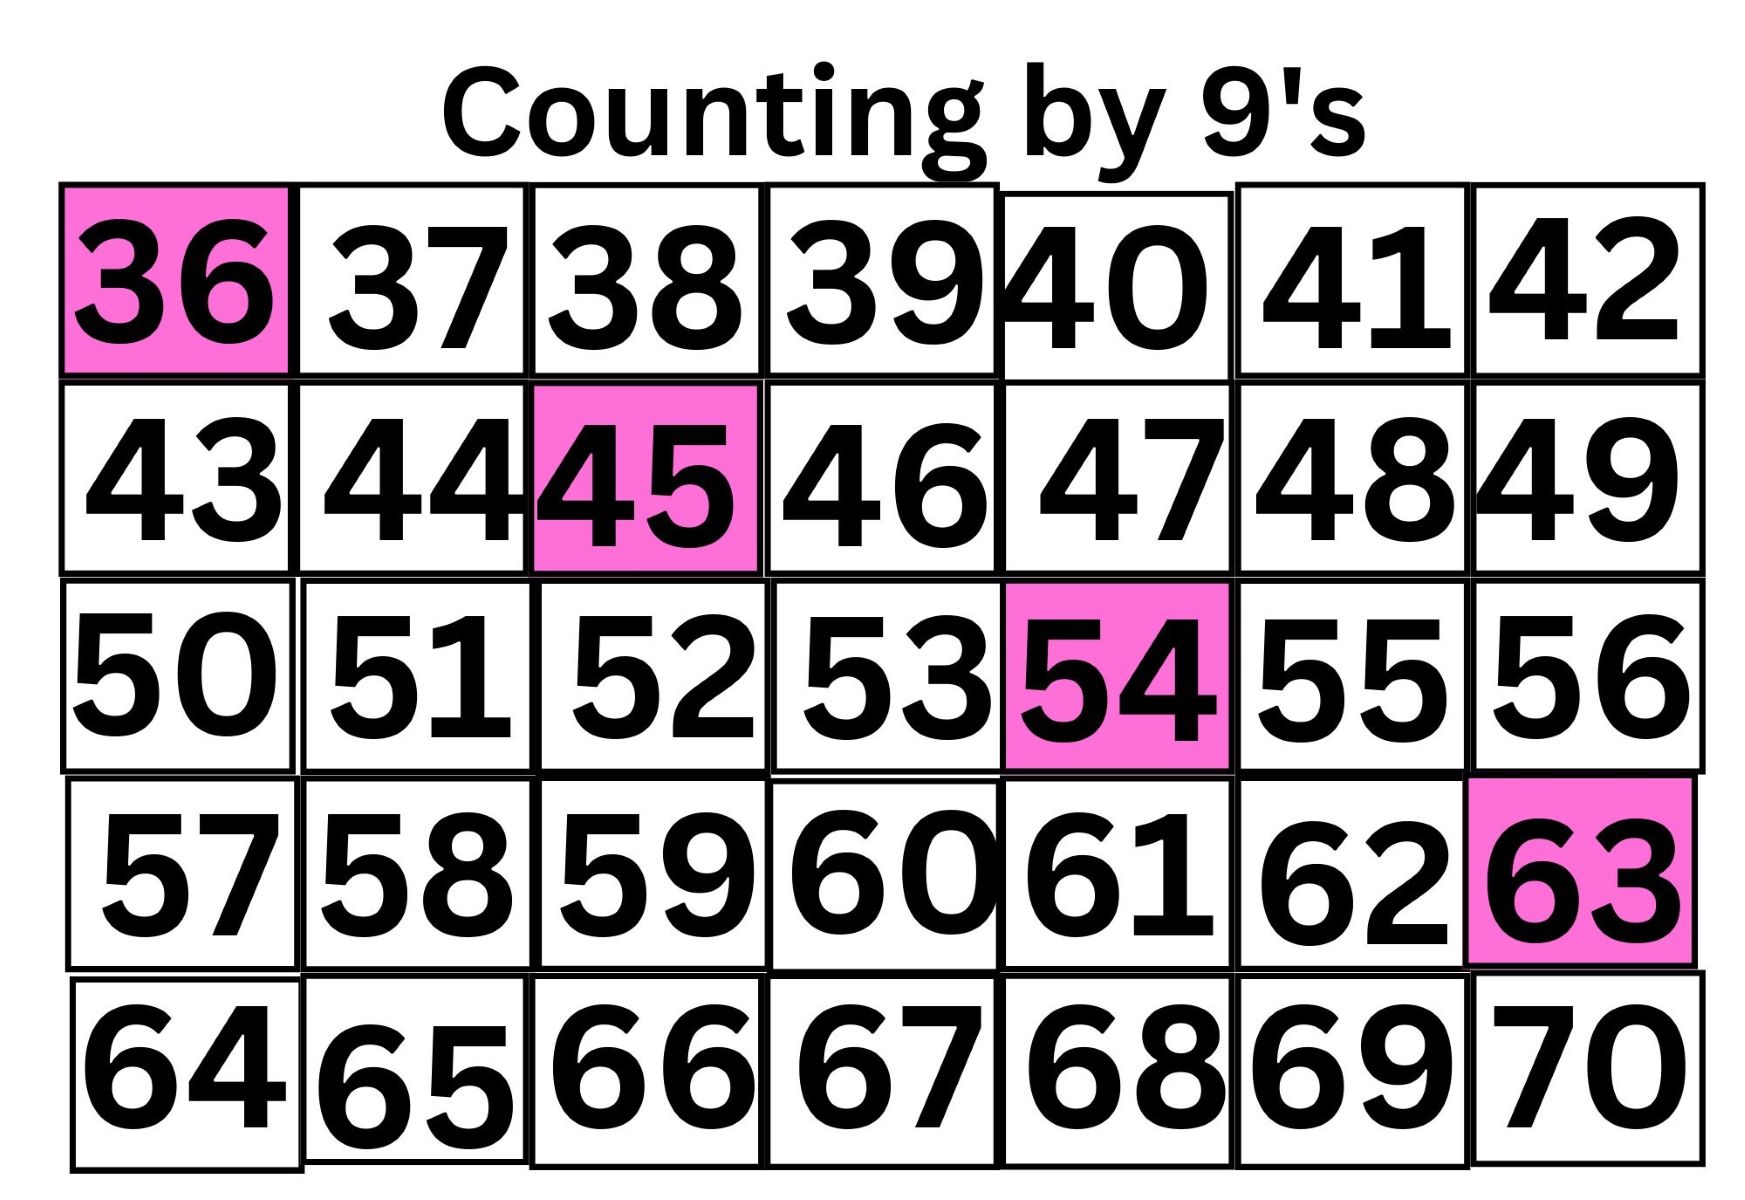 Discover The Surprising Number Of 9s Between 1 And 100!